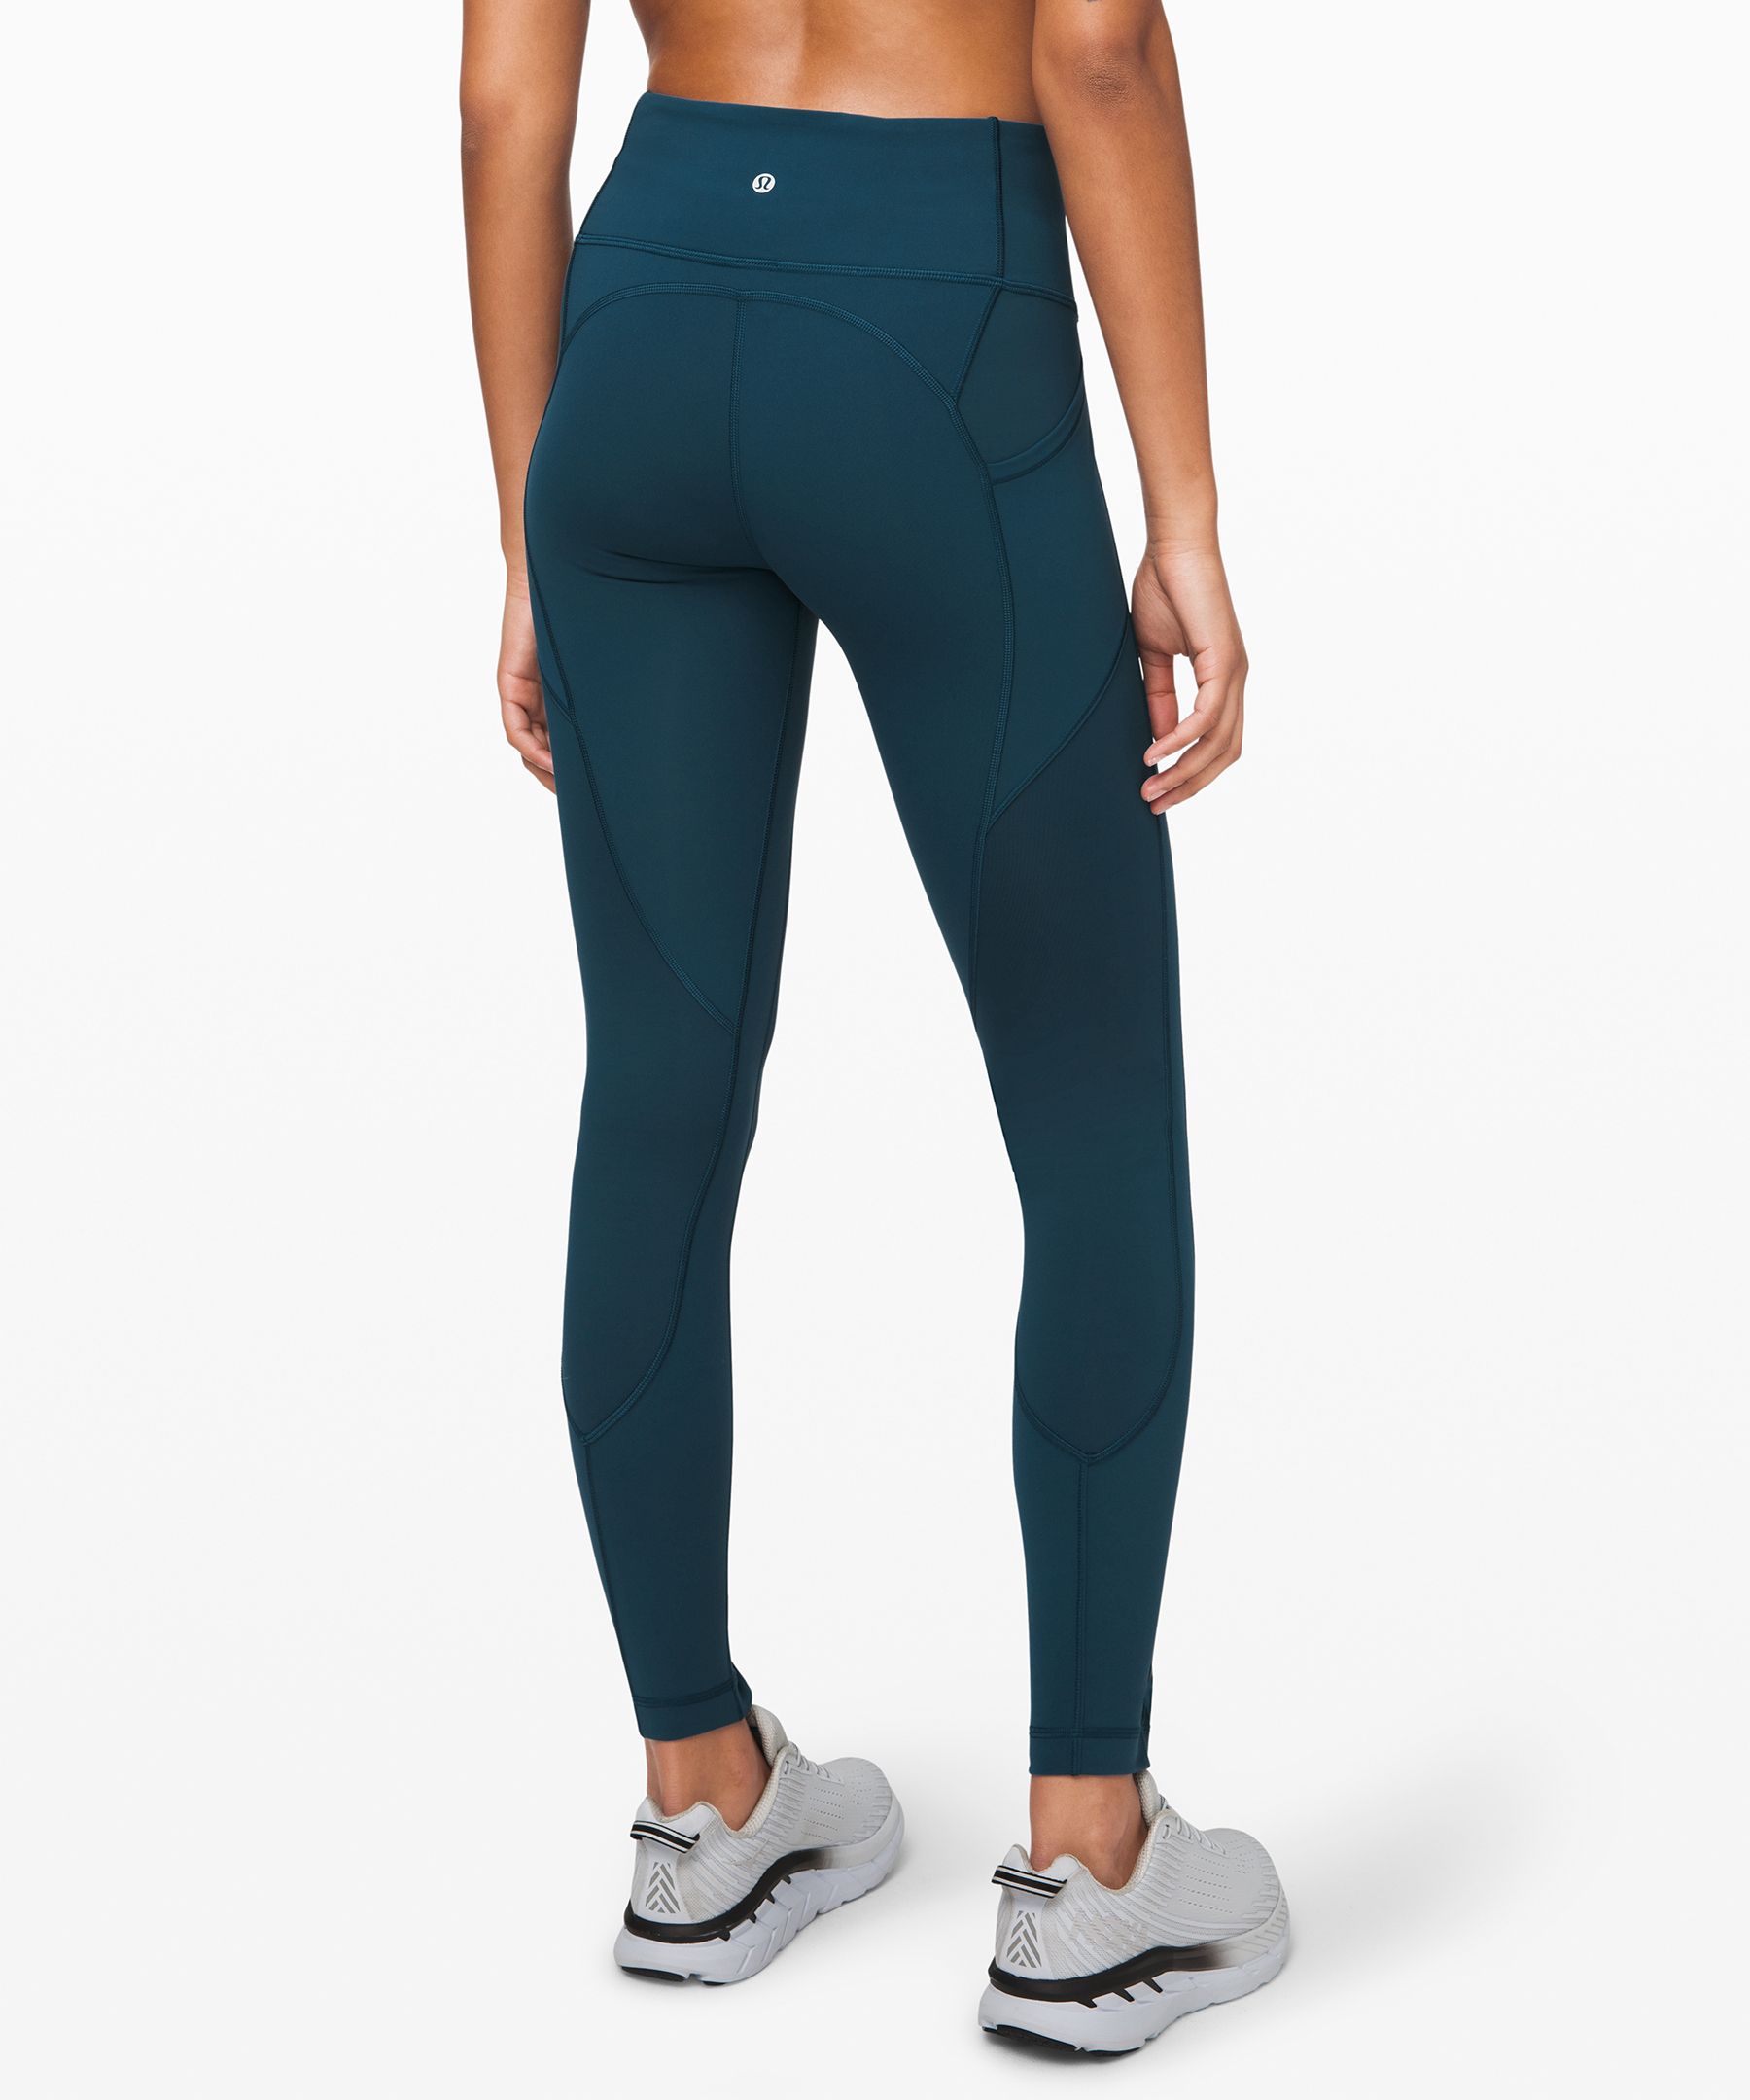 High-Rise All-Sport Pants with Zoned Compression